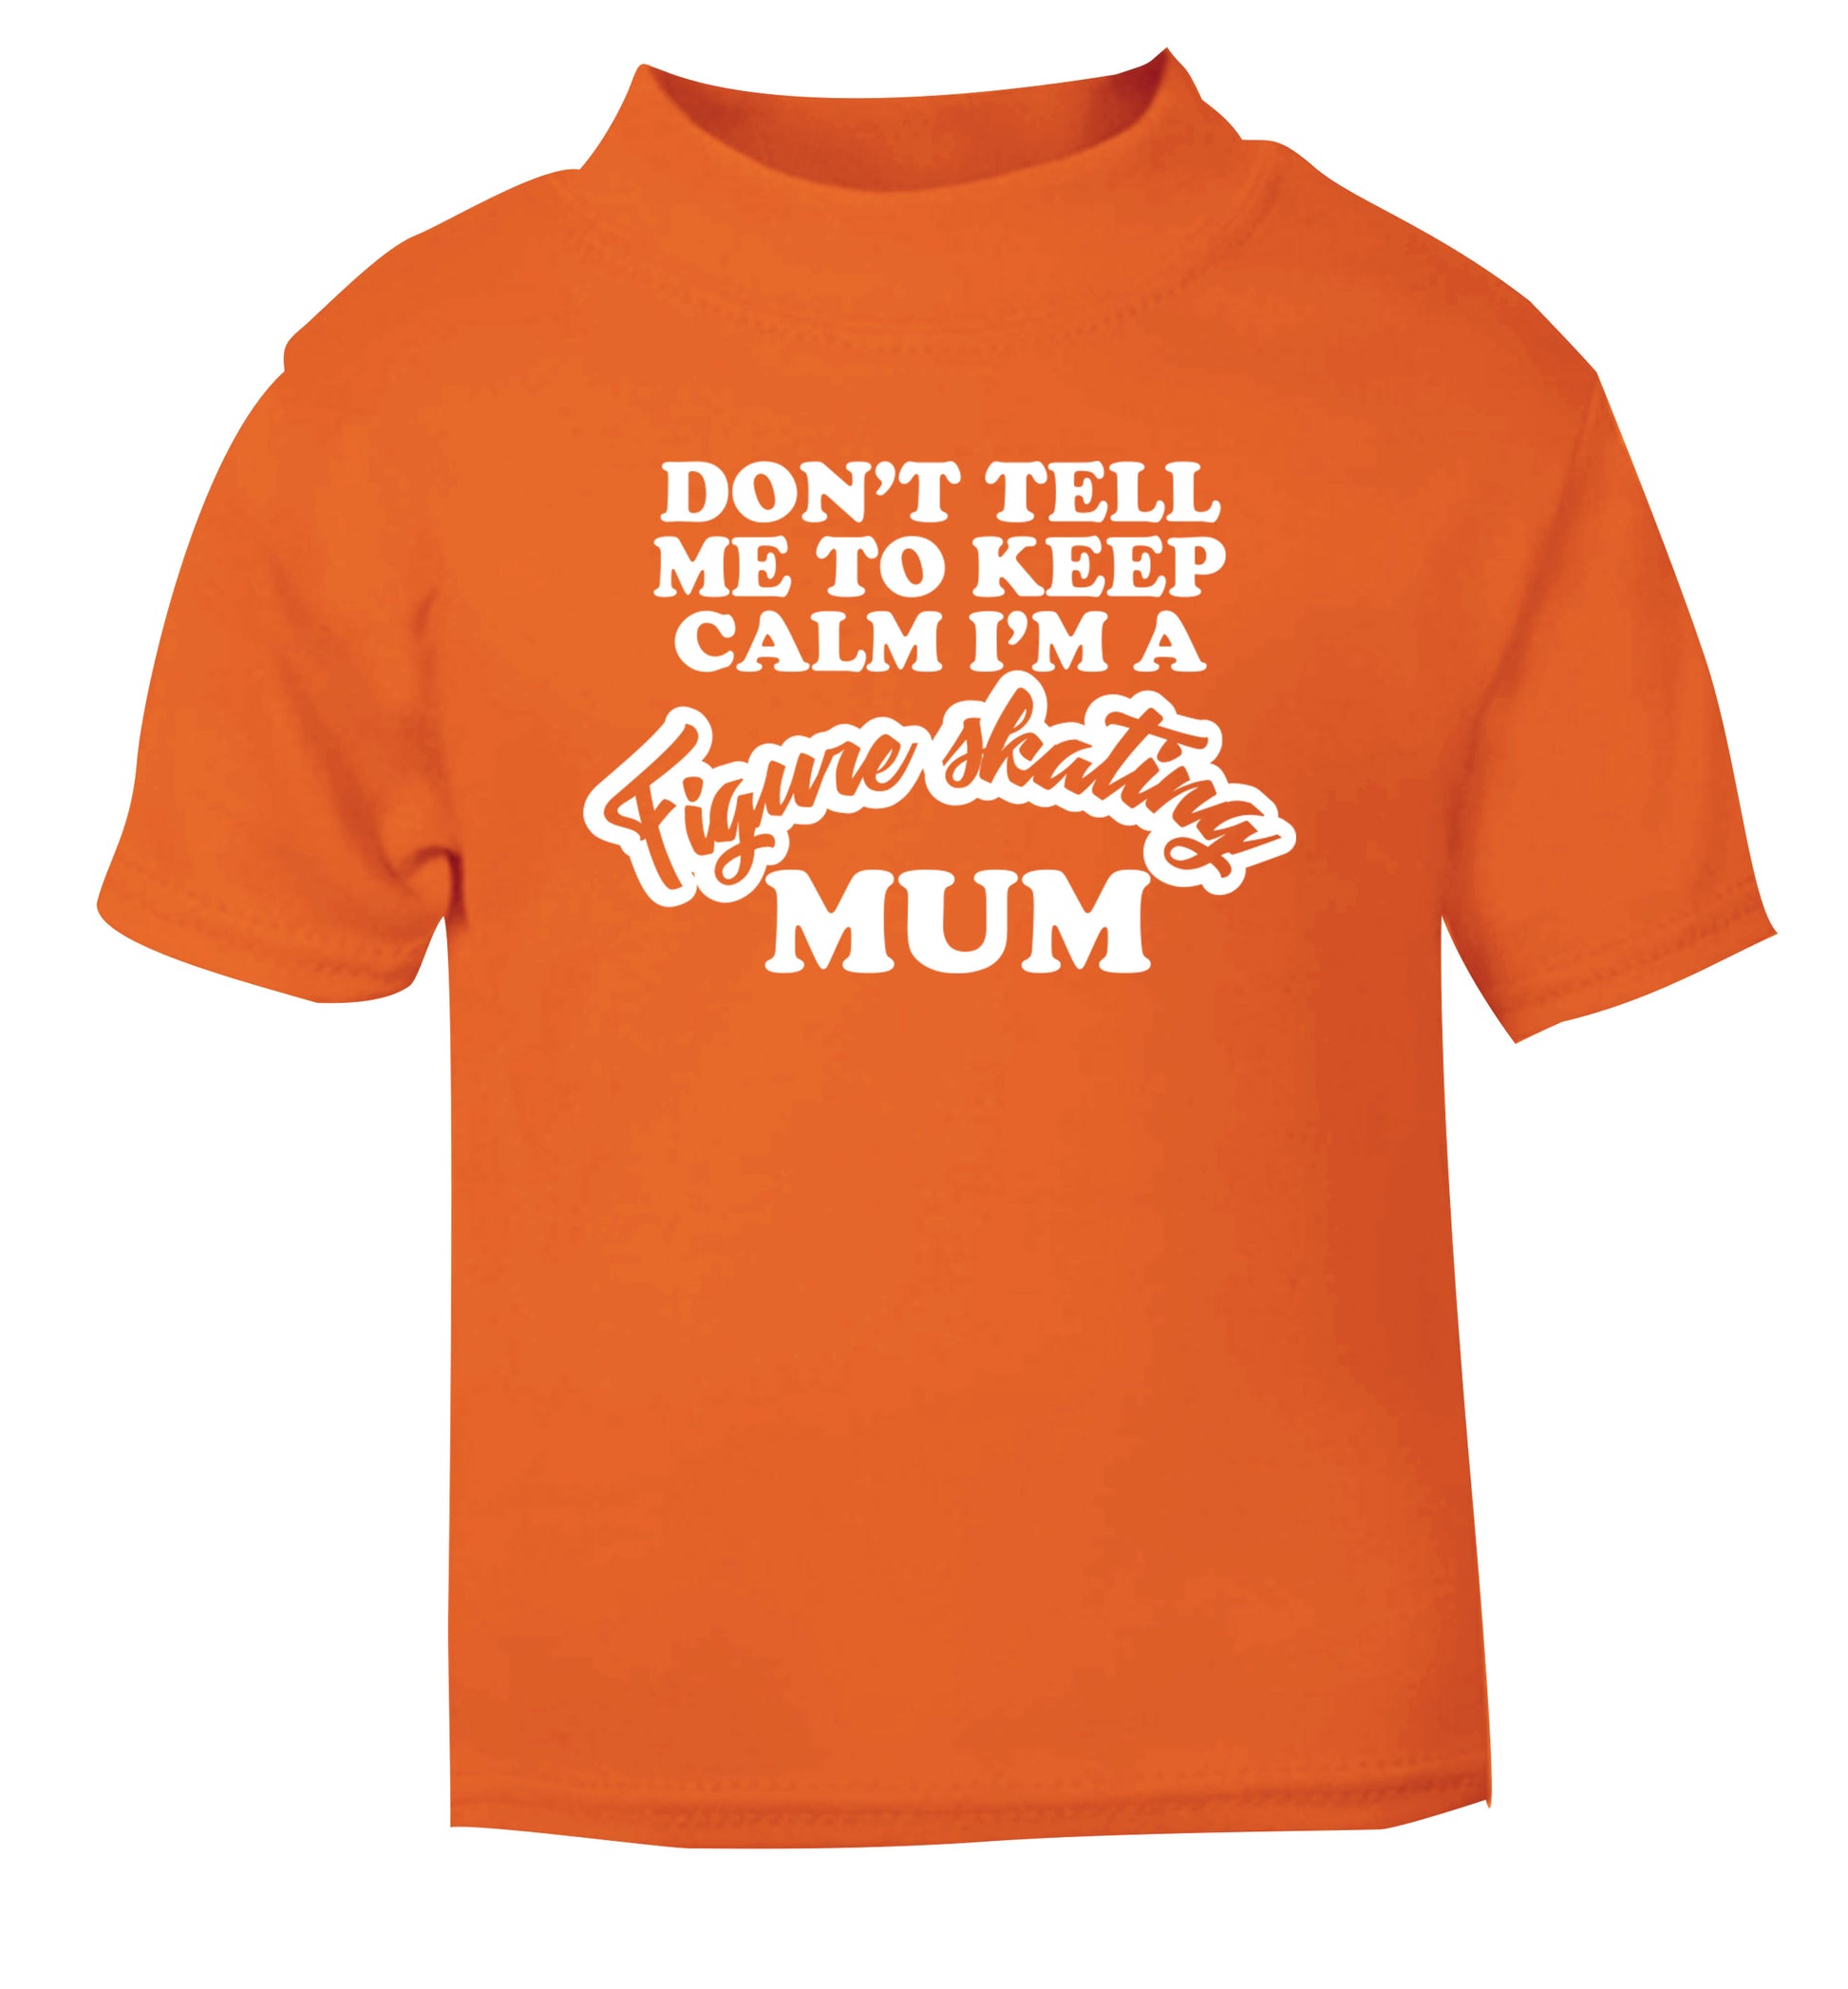 Don't tell me to keep calm I'm a figure skating mum orange Baby Toddler Tshirt 2 Years